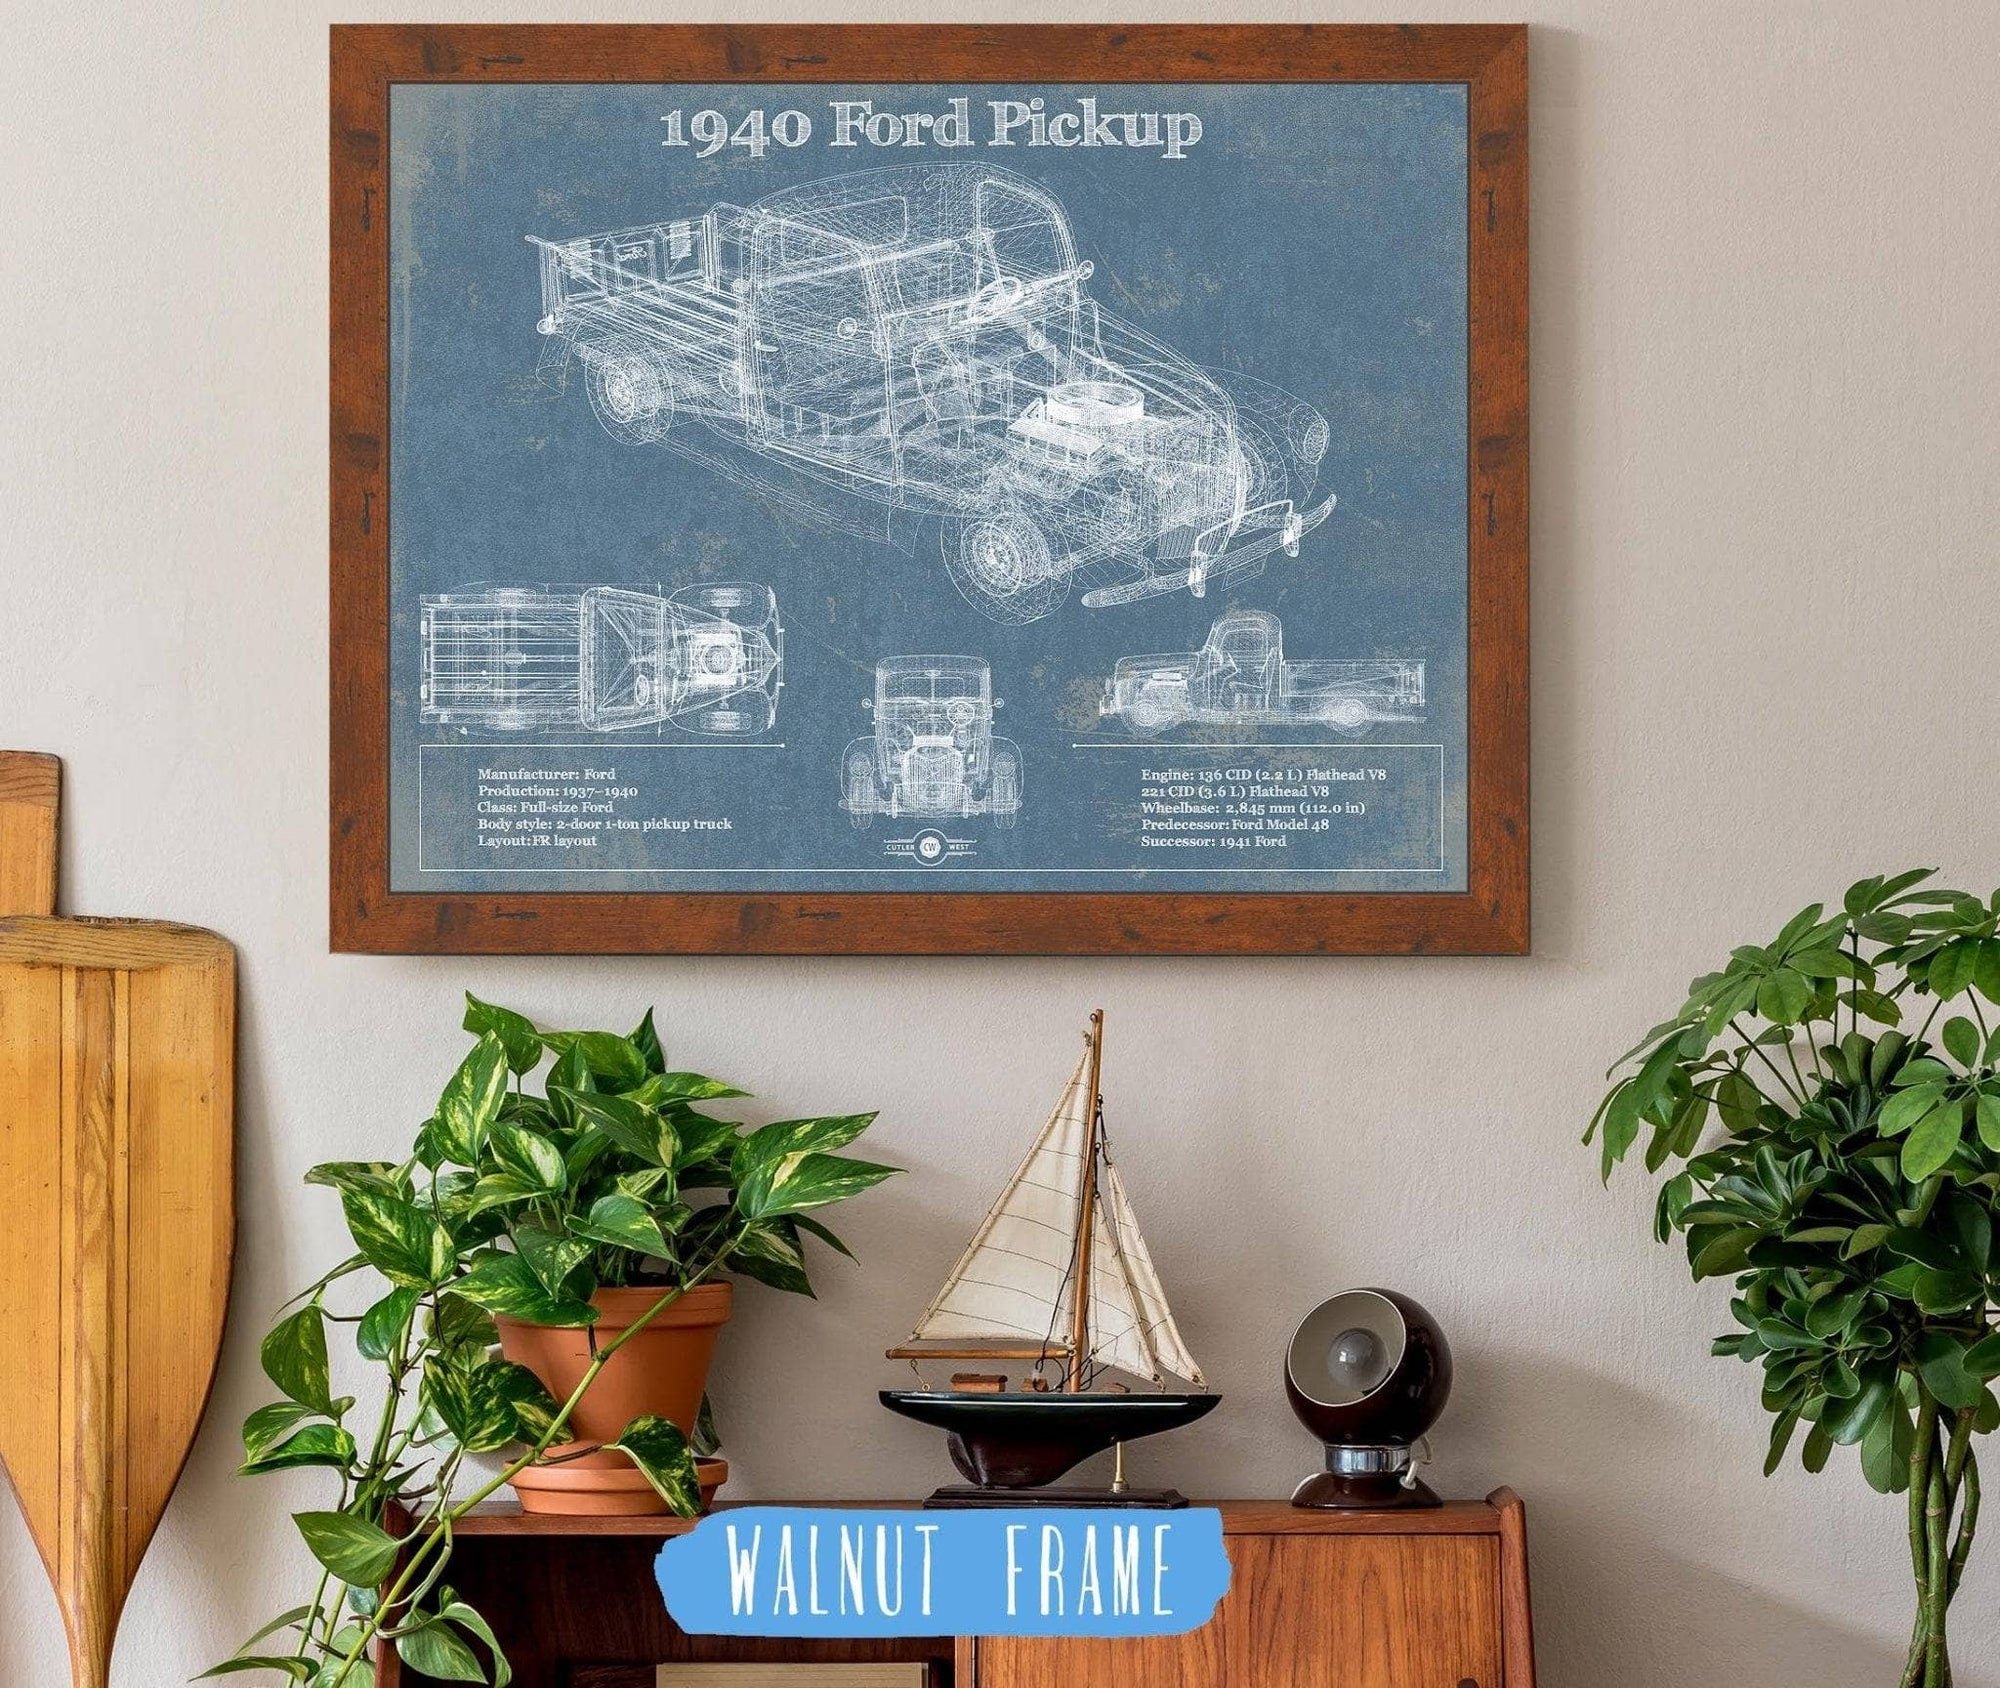 Cutler West Ford Collection 14" x 11" / Walnut Frame 1940 Ford Pickup Vintage Blueprint Auto Print 933311093_15635